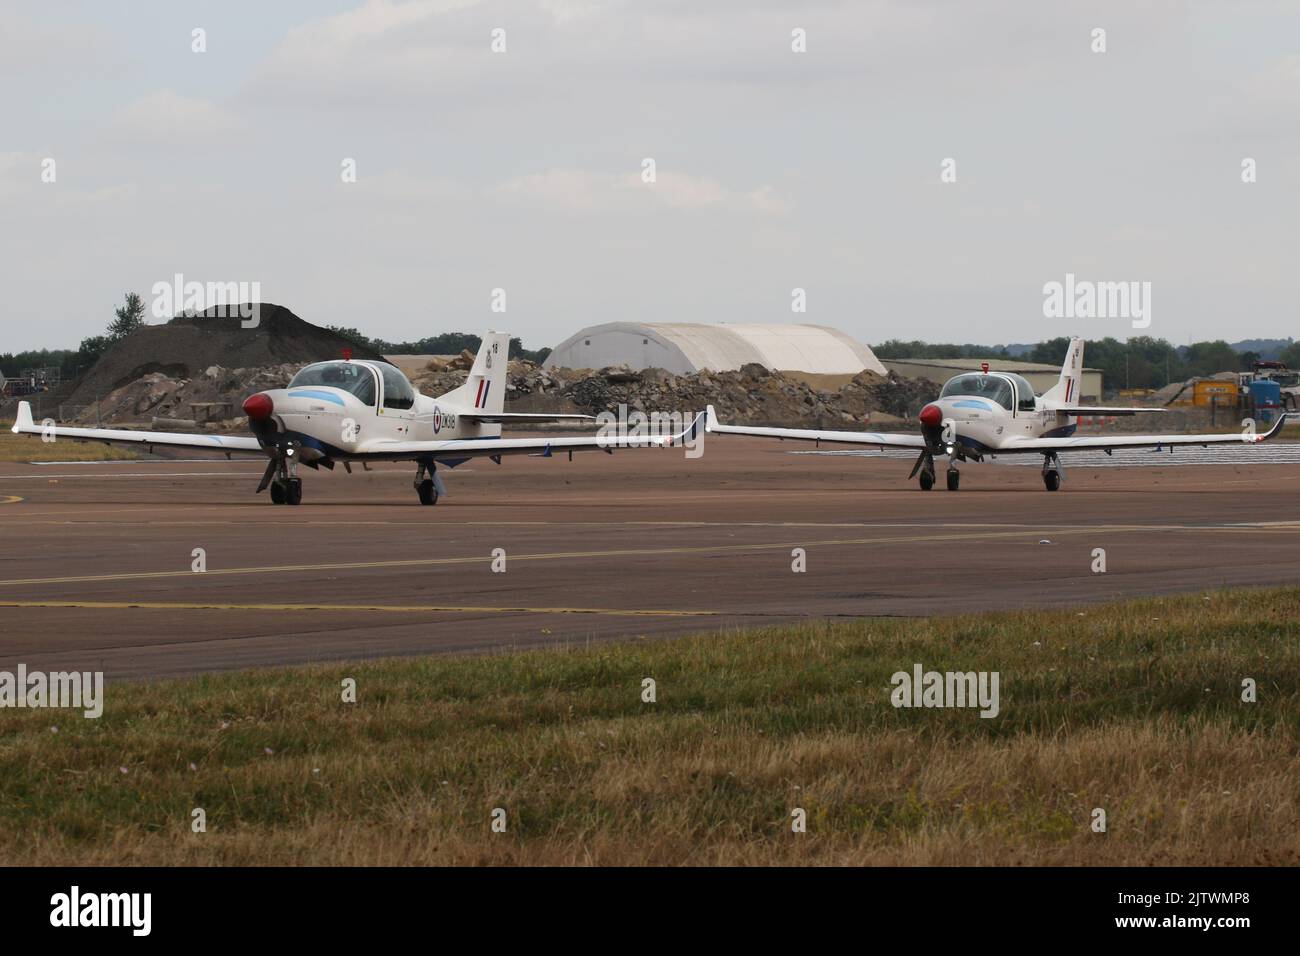 ZM318 and ZM309, two Grob Prefect T1s operated by the Royal Air Force (RAF), arriving at RAF Fairford in Gloucestershire, England, to participate in the Royal International Air Tattoo 2022 (RIAT 2022). Stock Photo